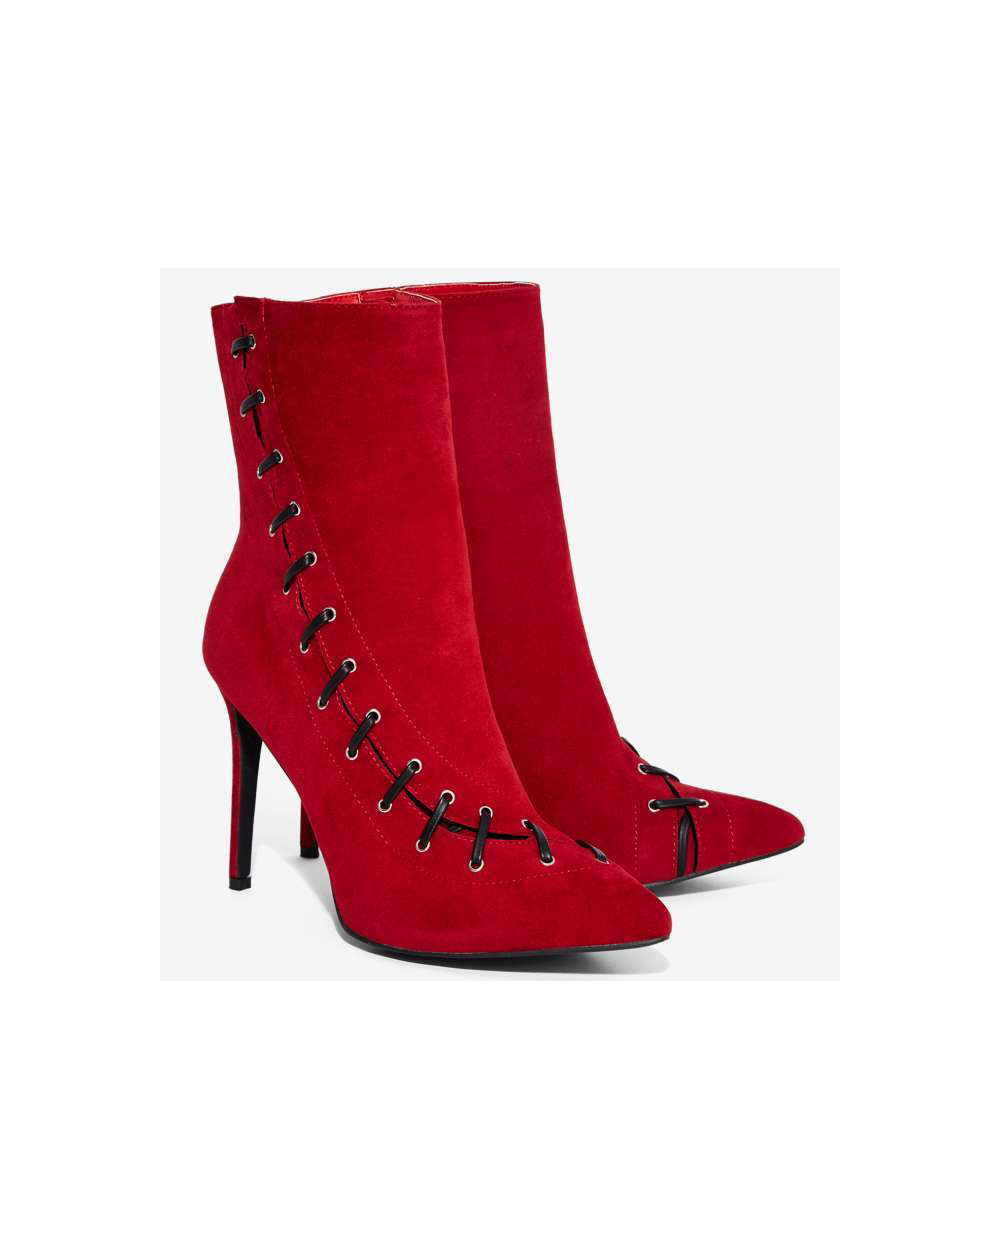 Lace-Up Bootie, $113, from Nasty Gal